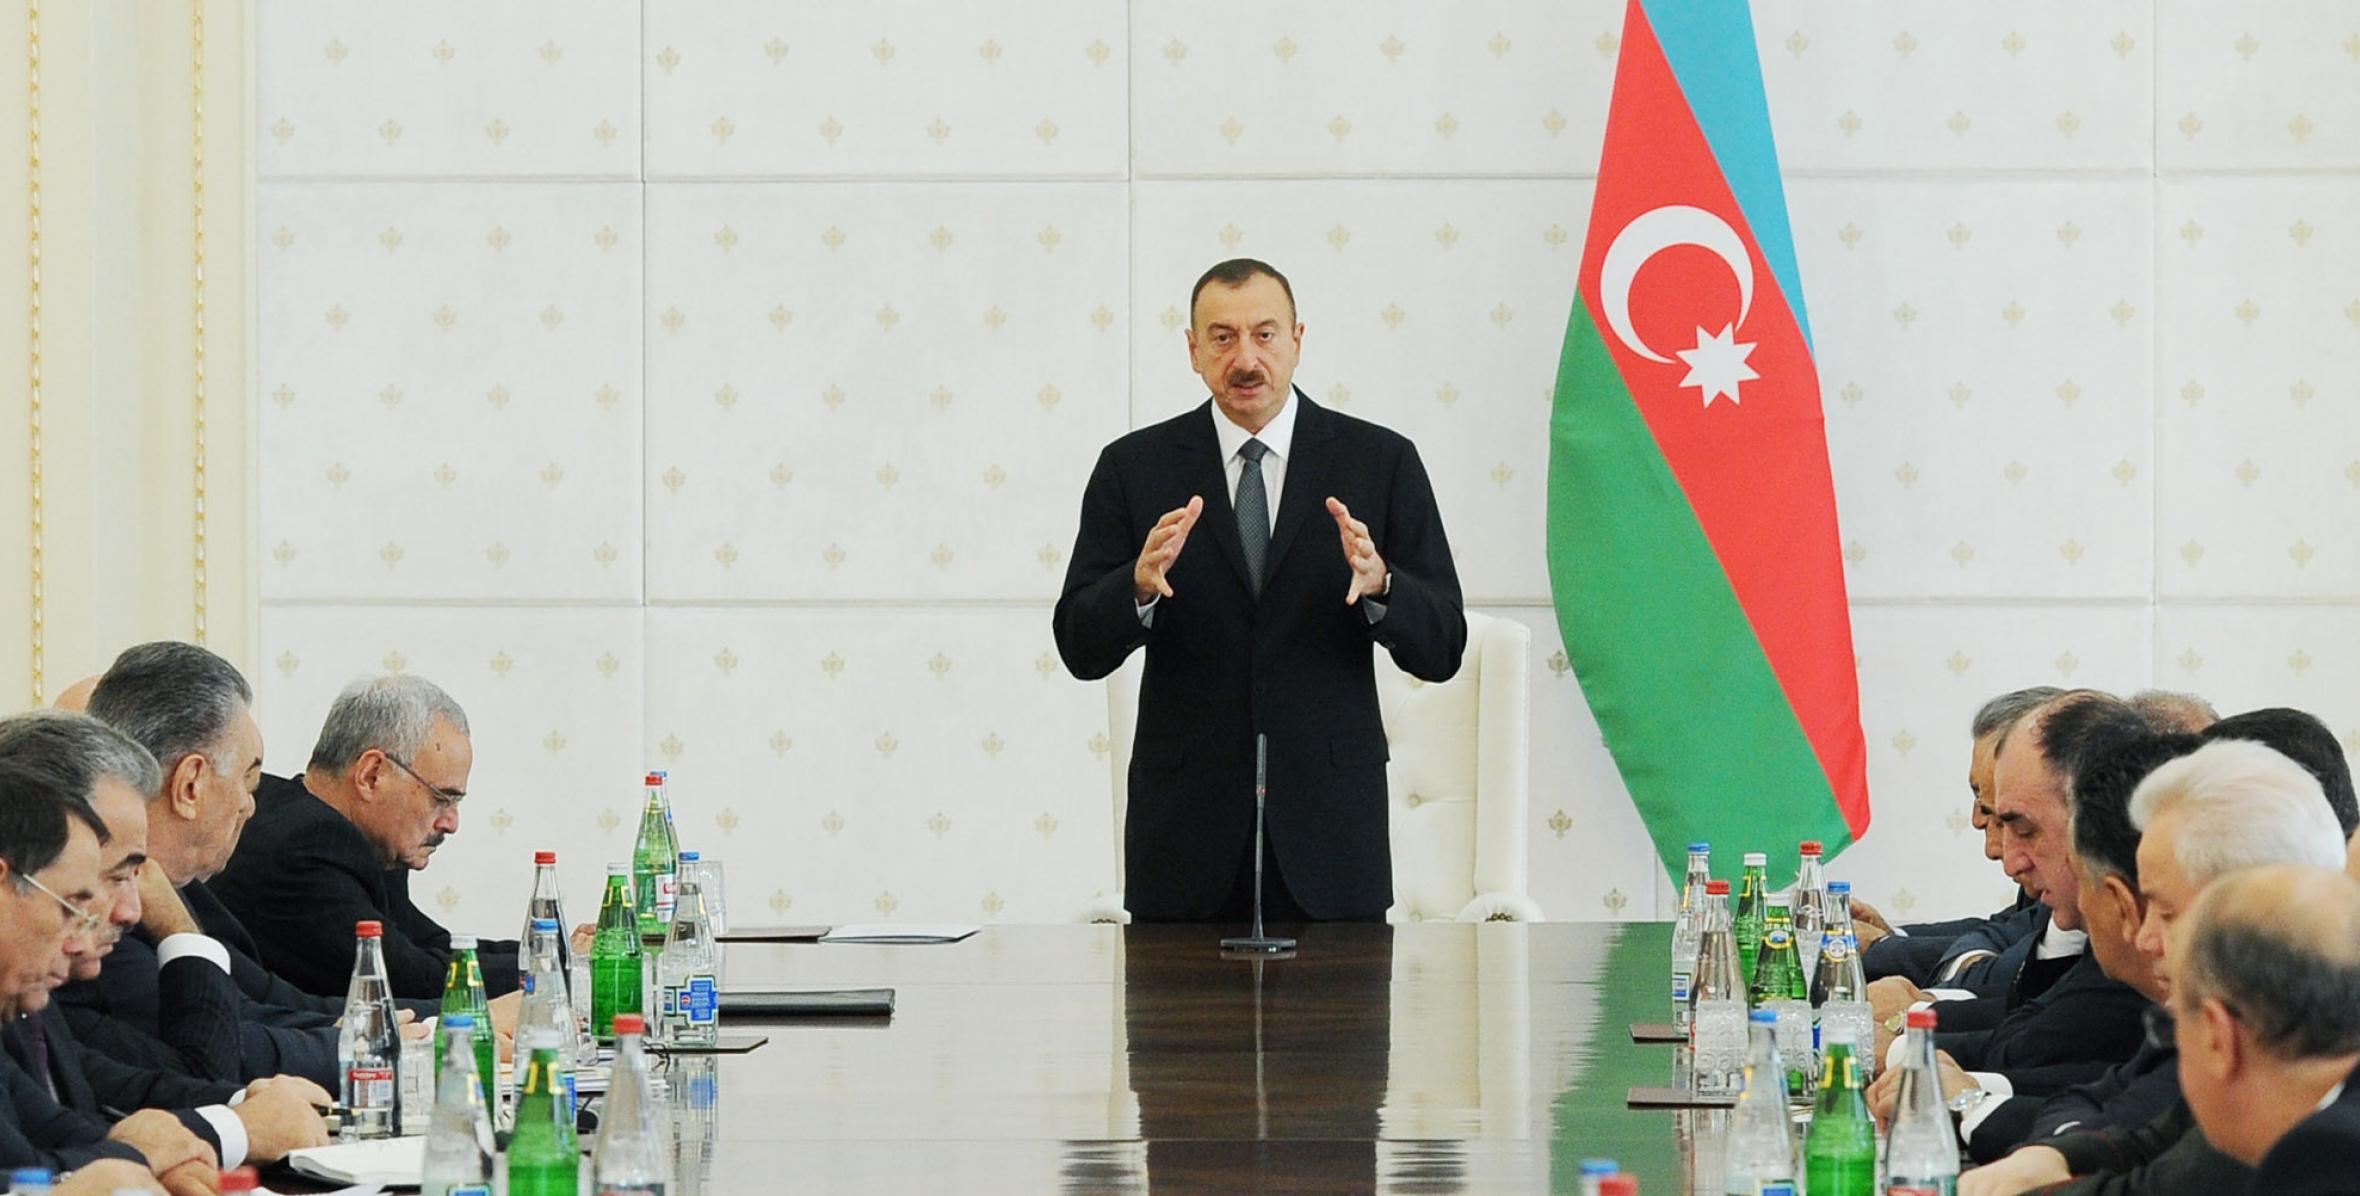 Opening speech by Ilham Aliyev at the meeting of the Cabinet of Ministers of the Republic of Azerbaijan dedicated to the results of socioeconomic development of Azerbaijan in the first nine months of 2013 and objectives for the future